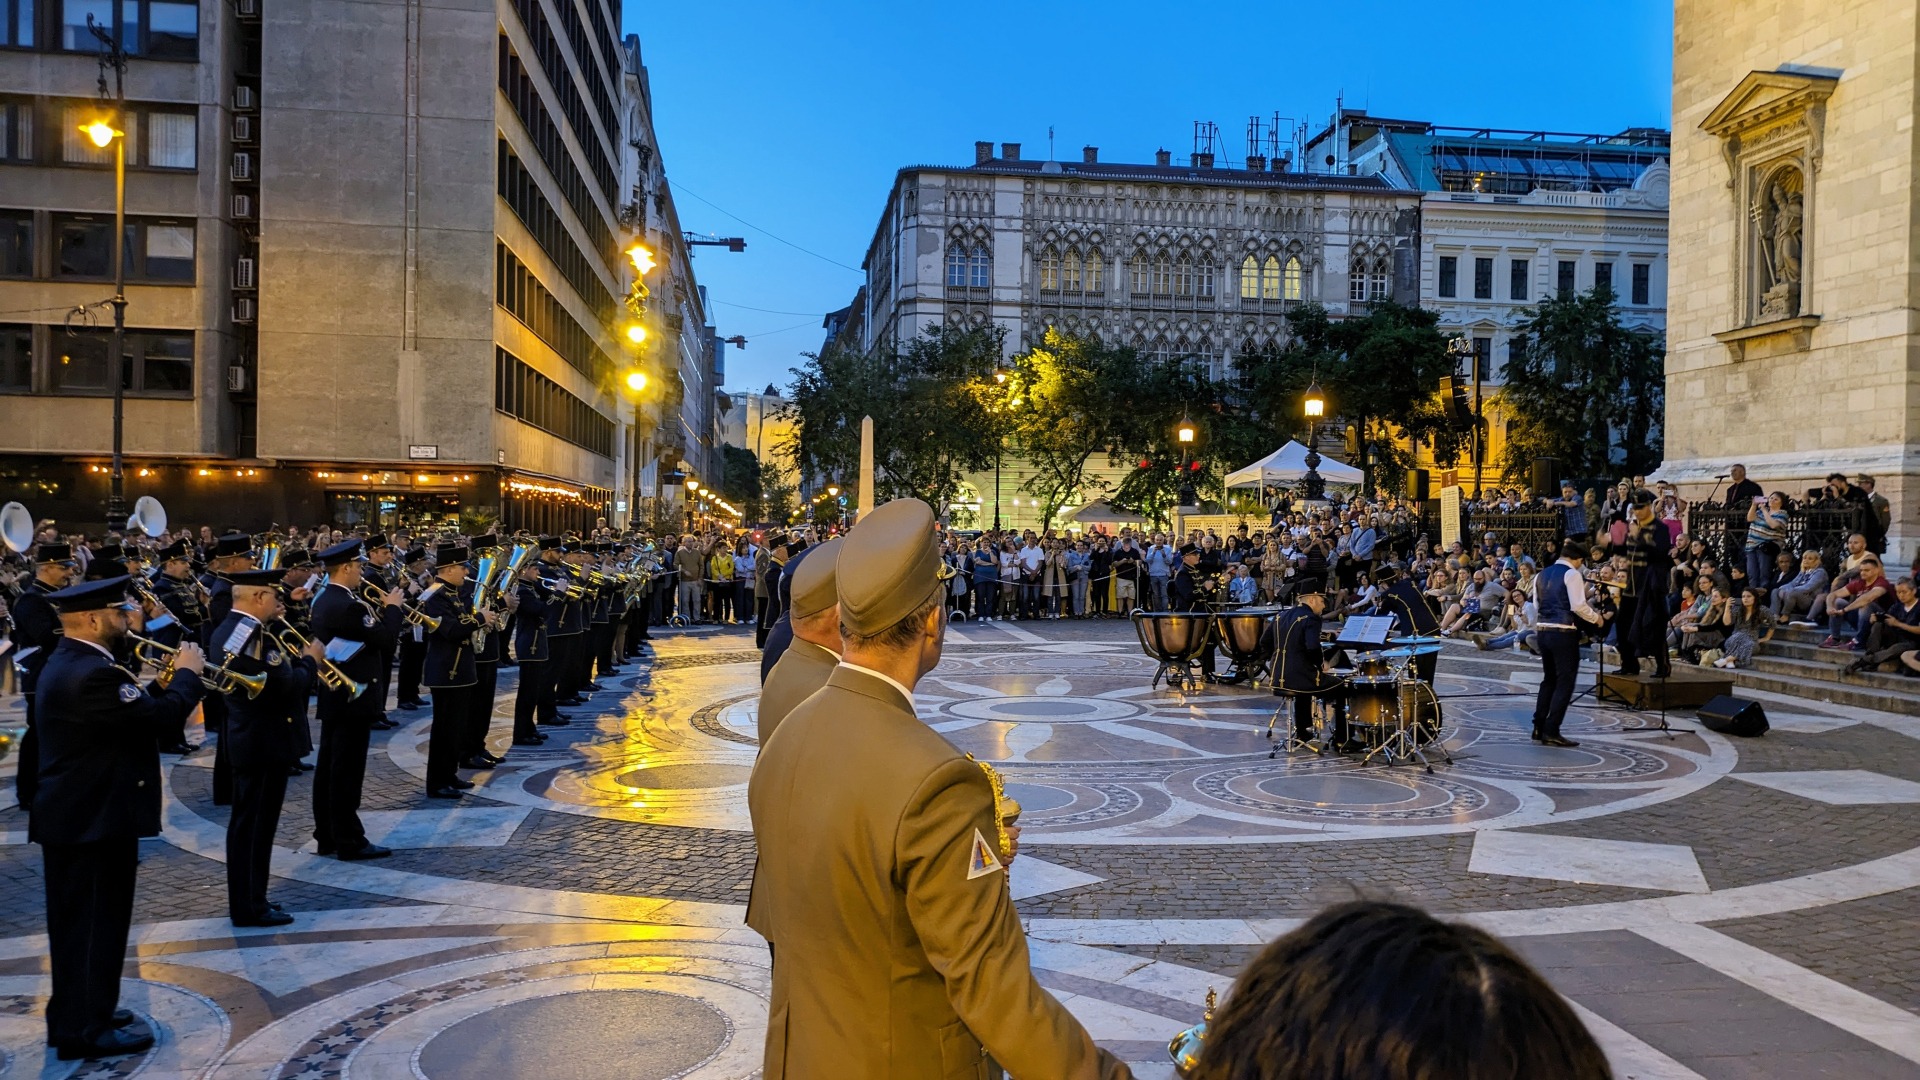 photo of the Hungarian military band playing in front of the Saint Stephen's Basilica